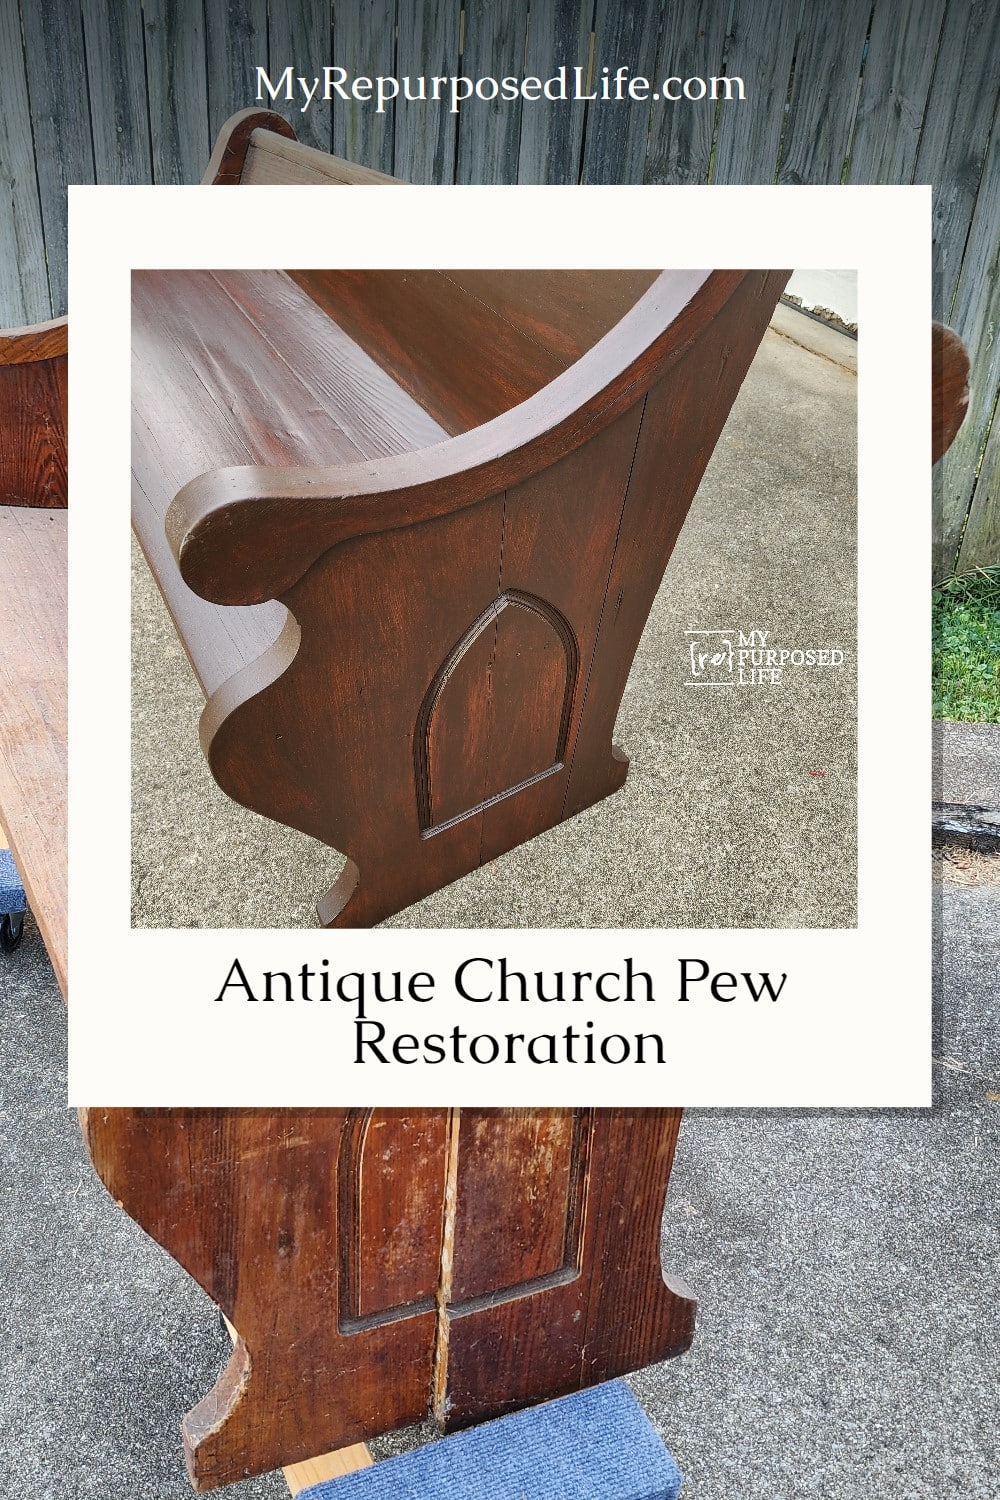 A small antique church pew longs to turn back the hands of time. Follow along as things go terribly wrong before she has her beauty restored. via @repurposedlife